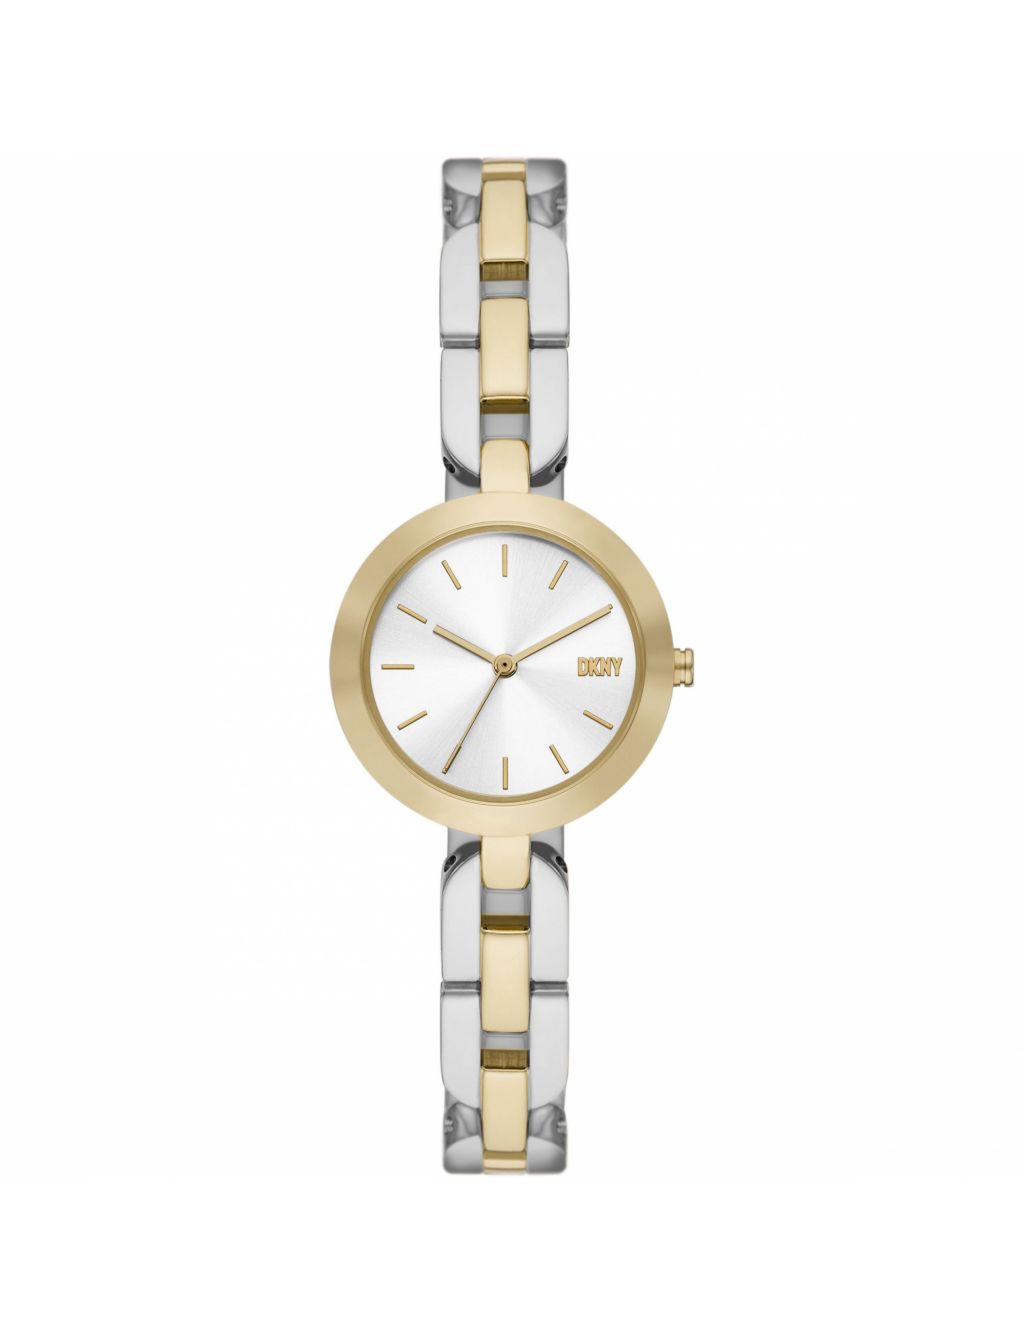 DKNY City Link Two Tone Watch image 1